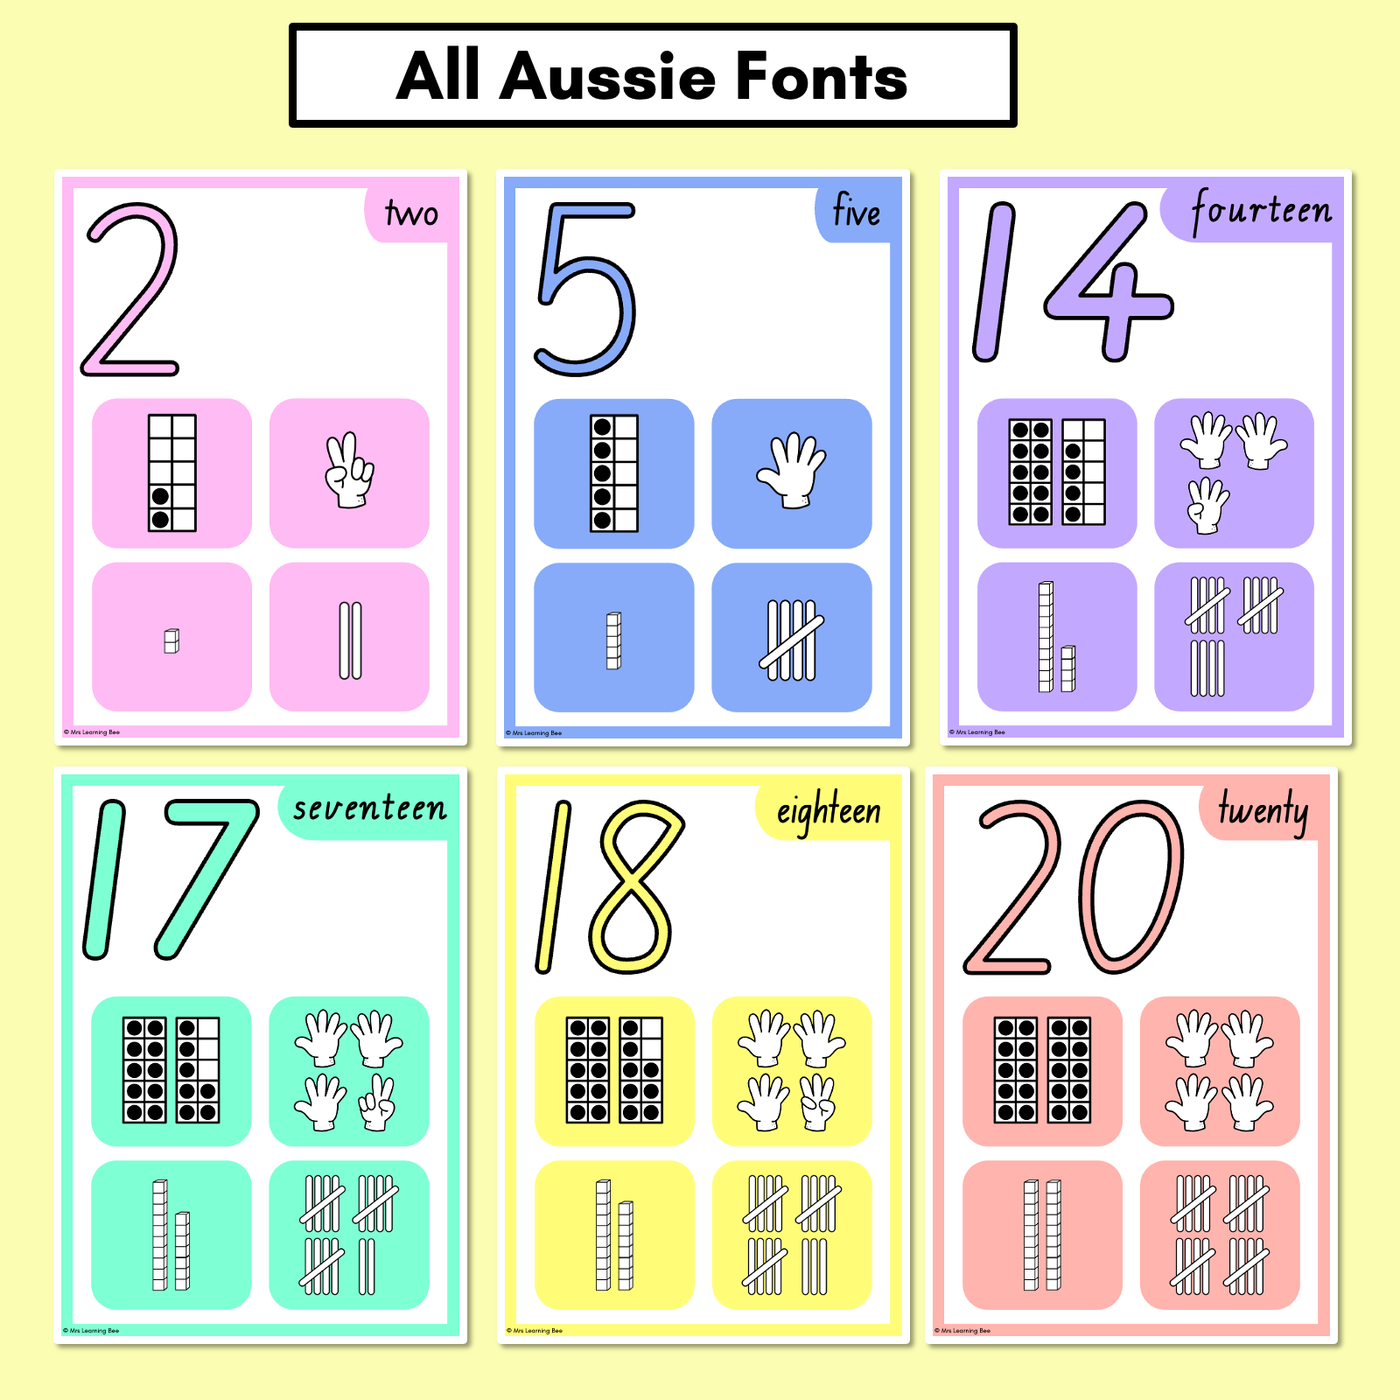 NUMBER POSTERS with ten frames, base ten blocks, tallies & fingers - The Kasey Rainbow Collection